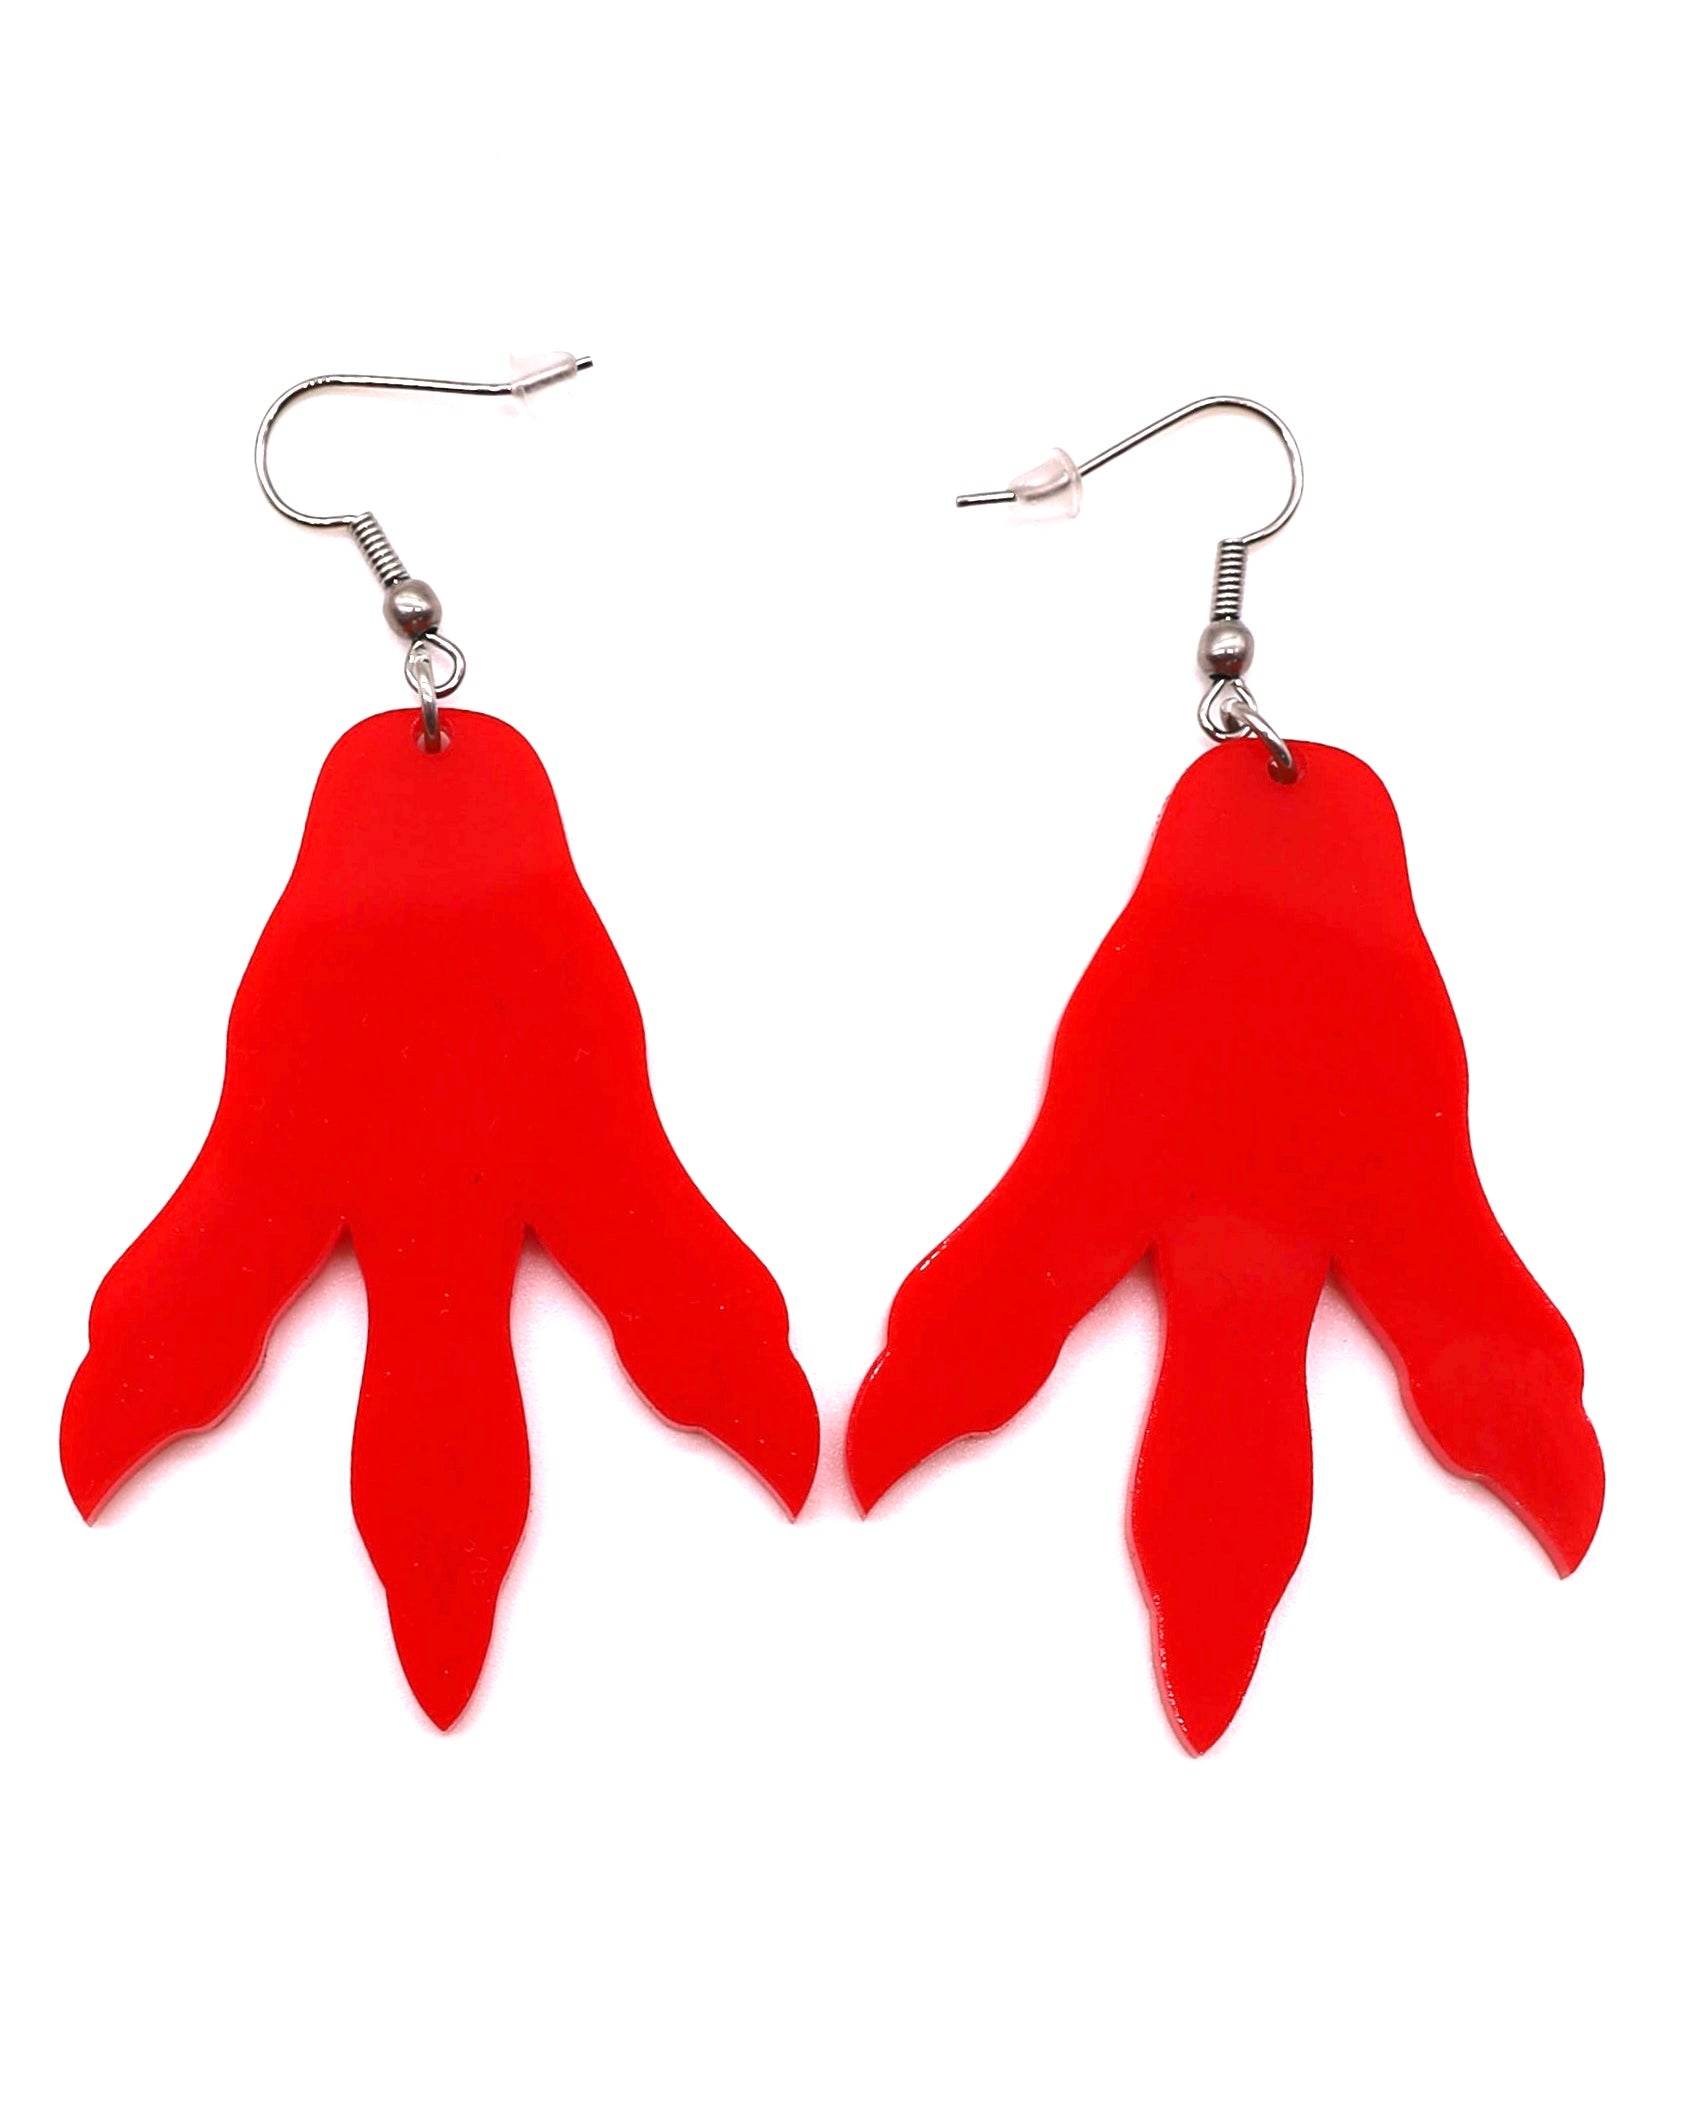 Dino Print Earrings in Red - Make a Roaring Statement at Your Next Festival